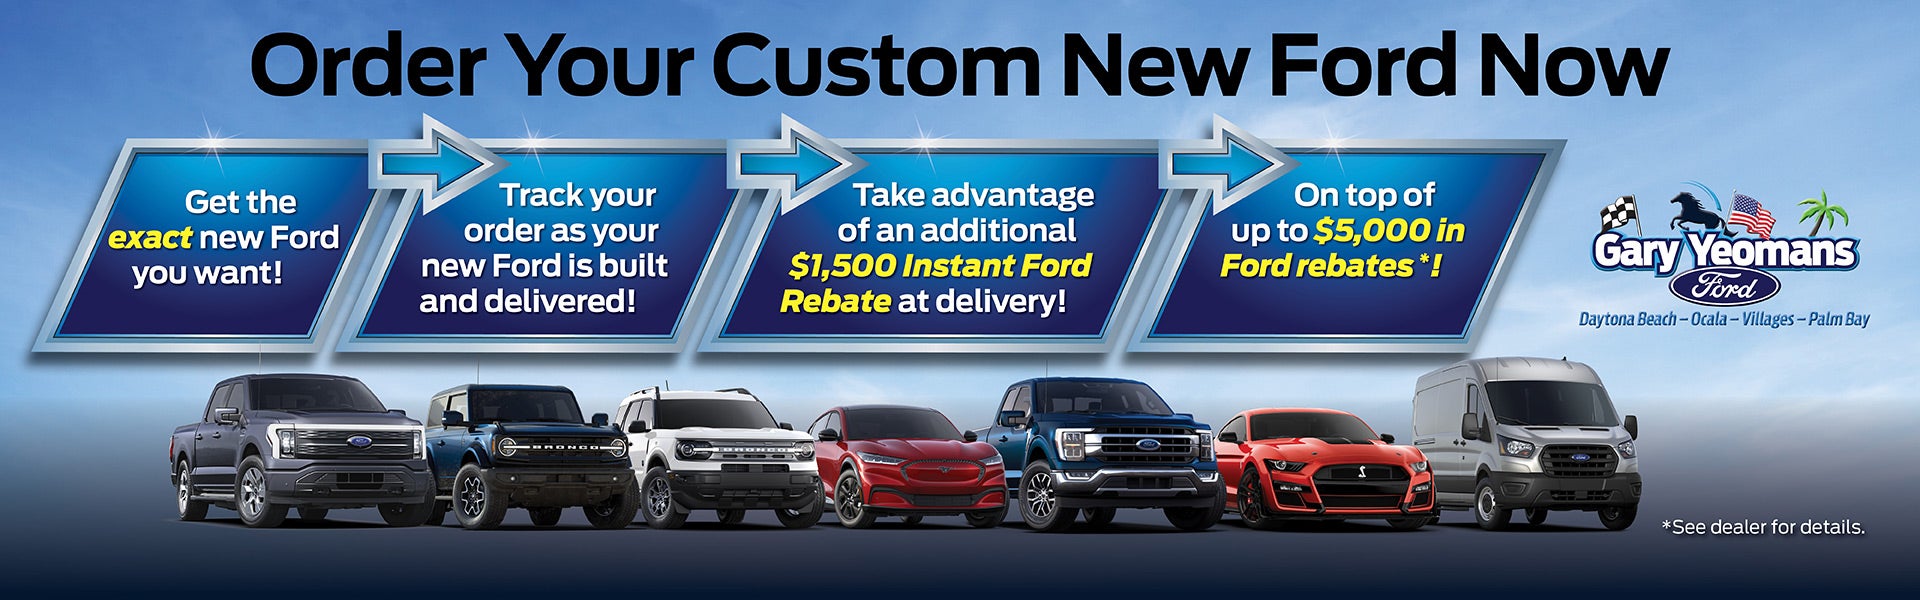 Order Your Custom New Ford